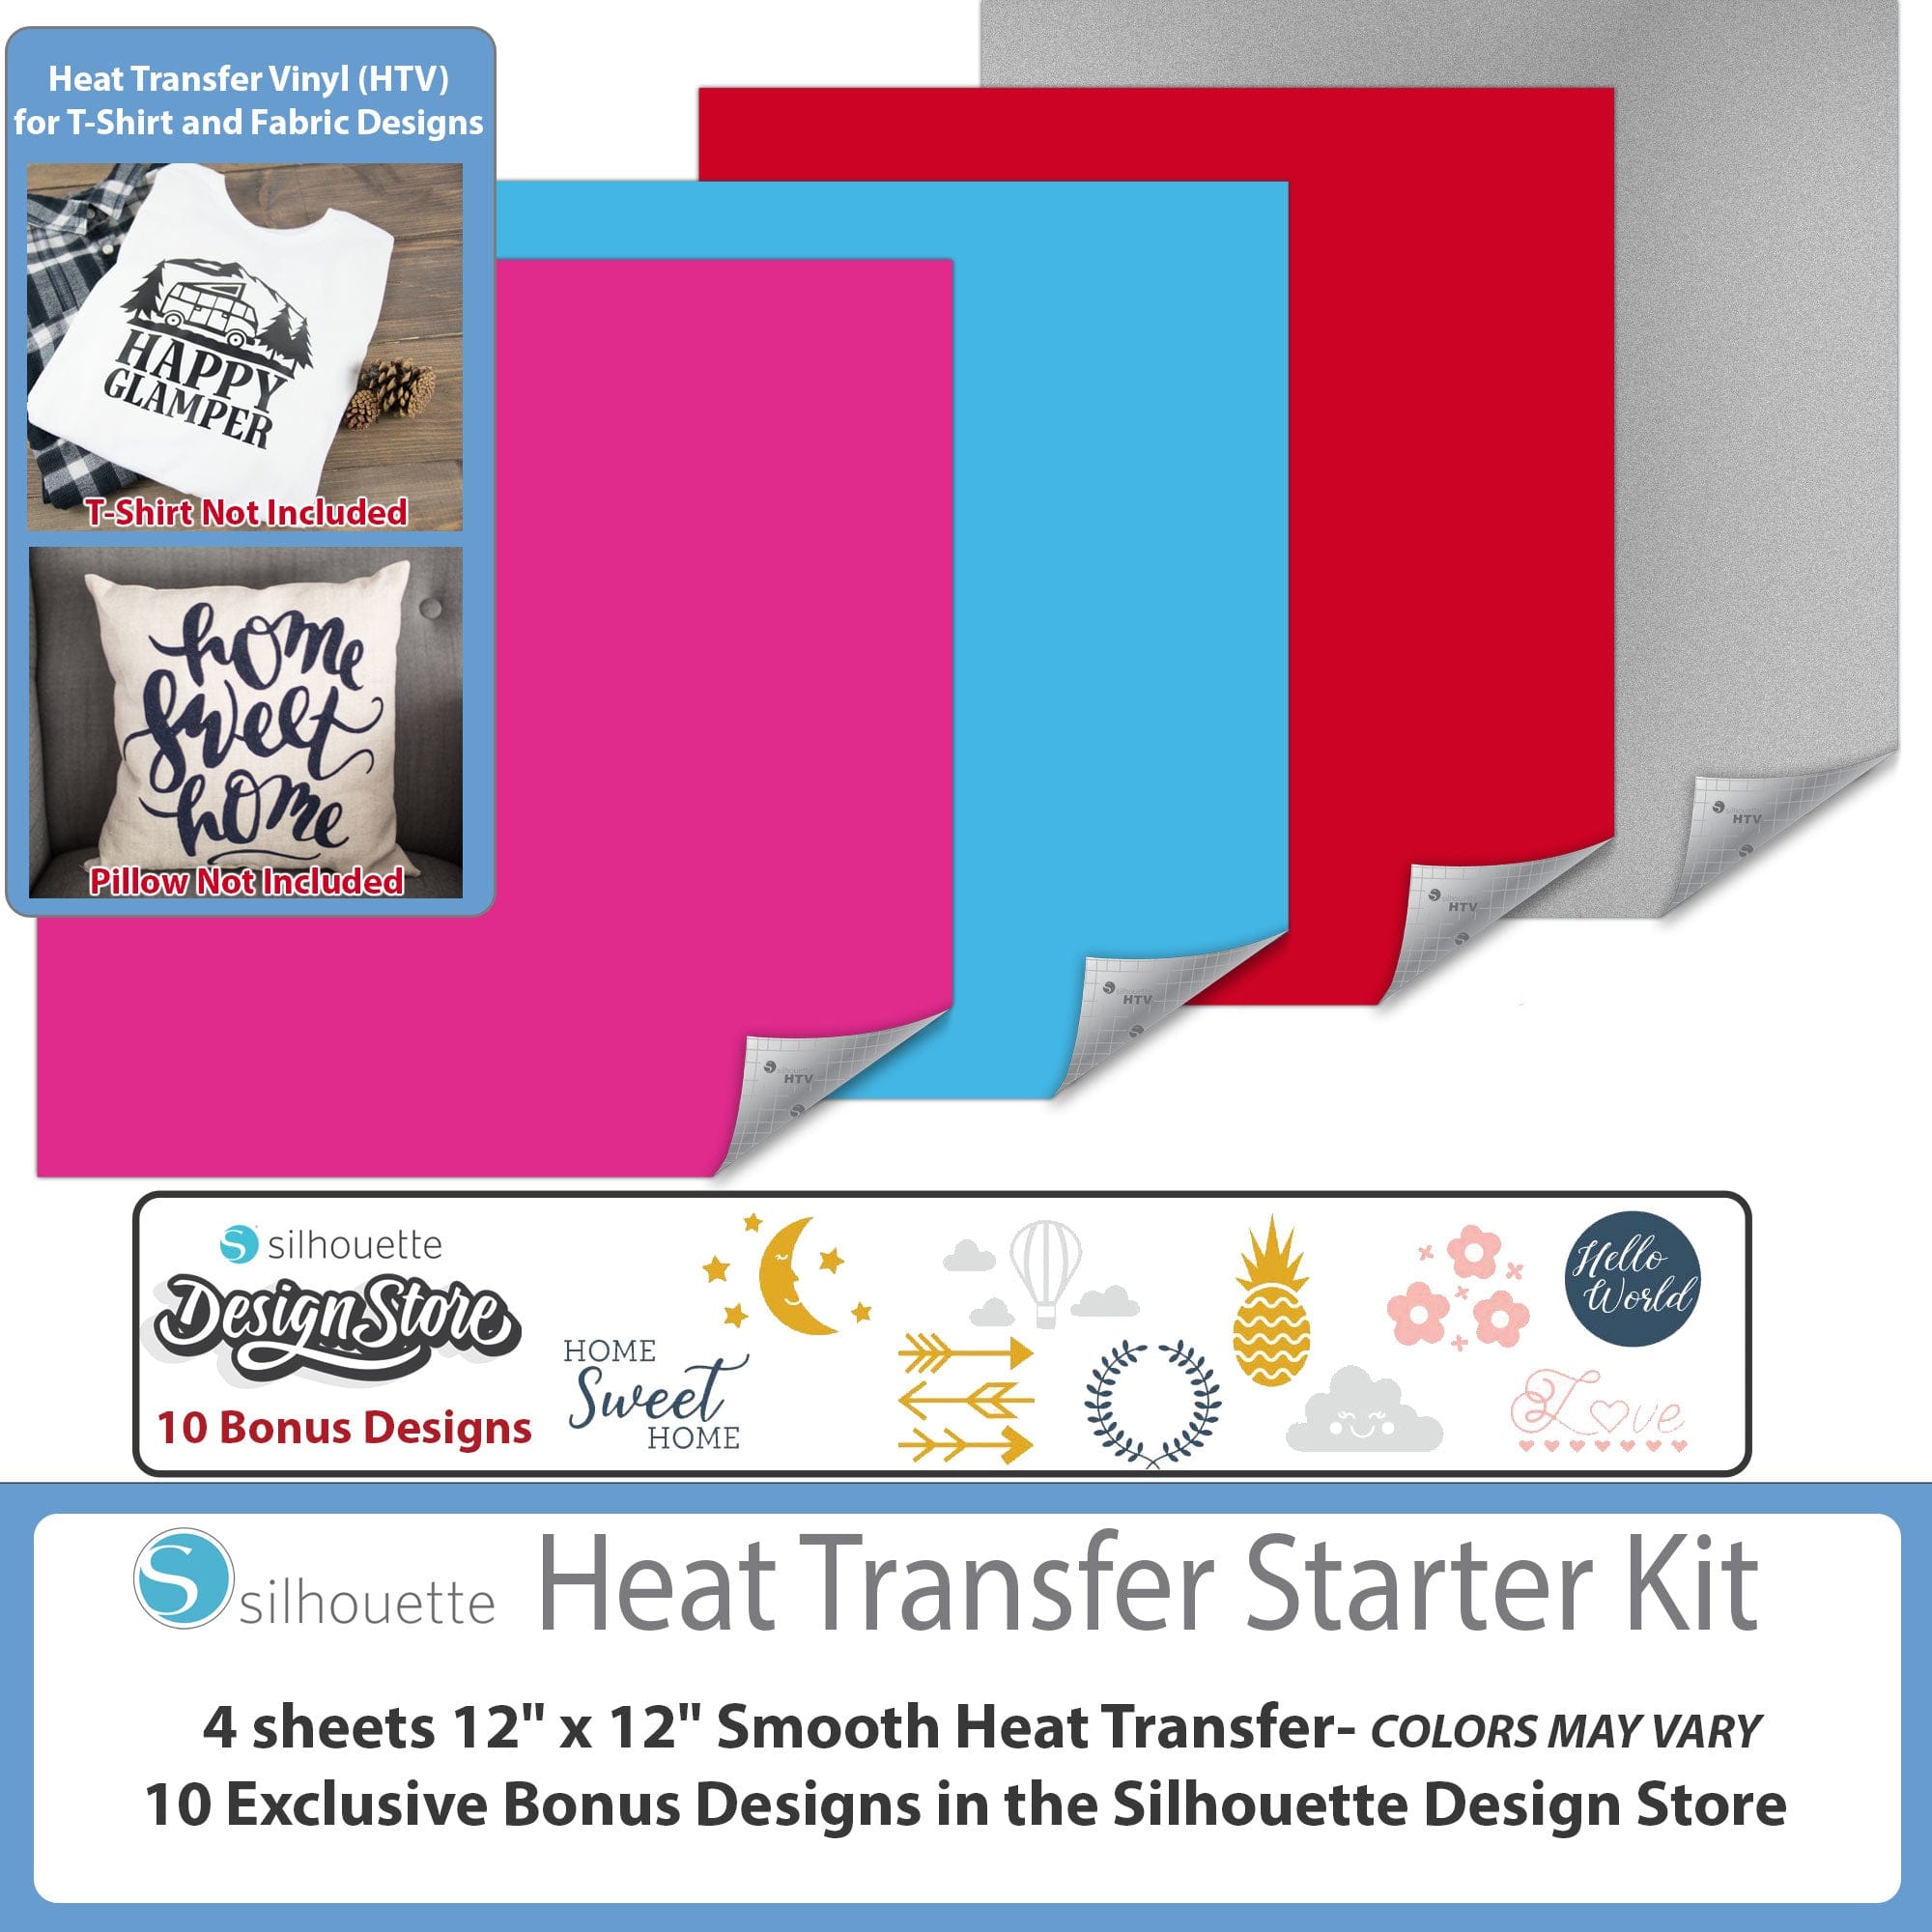 Silhouette America Craft Cutters Silhouette Cameo 4 White Bundle with Vinyl and  Heat Transfer Starter Kits, Bonus Autoblade, 24 Pack of Pens, Vinyl Tool Kit, 120 Exclusive Designs